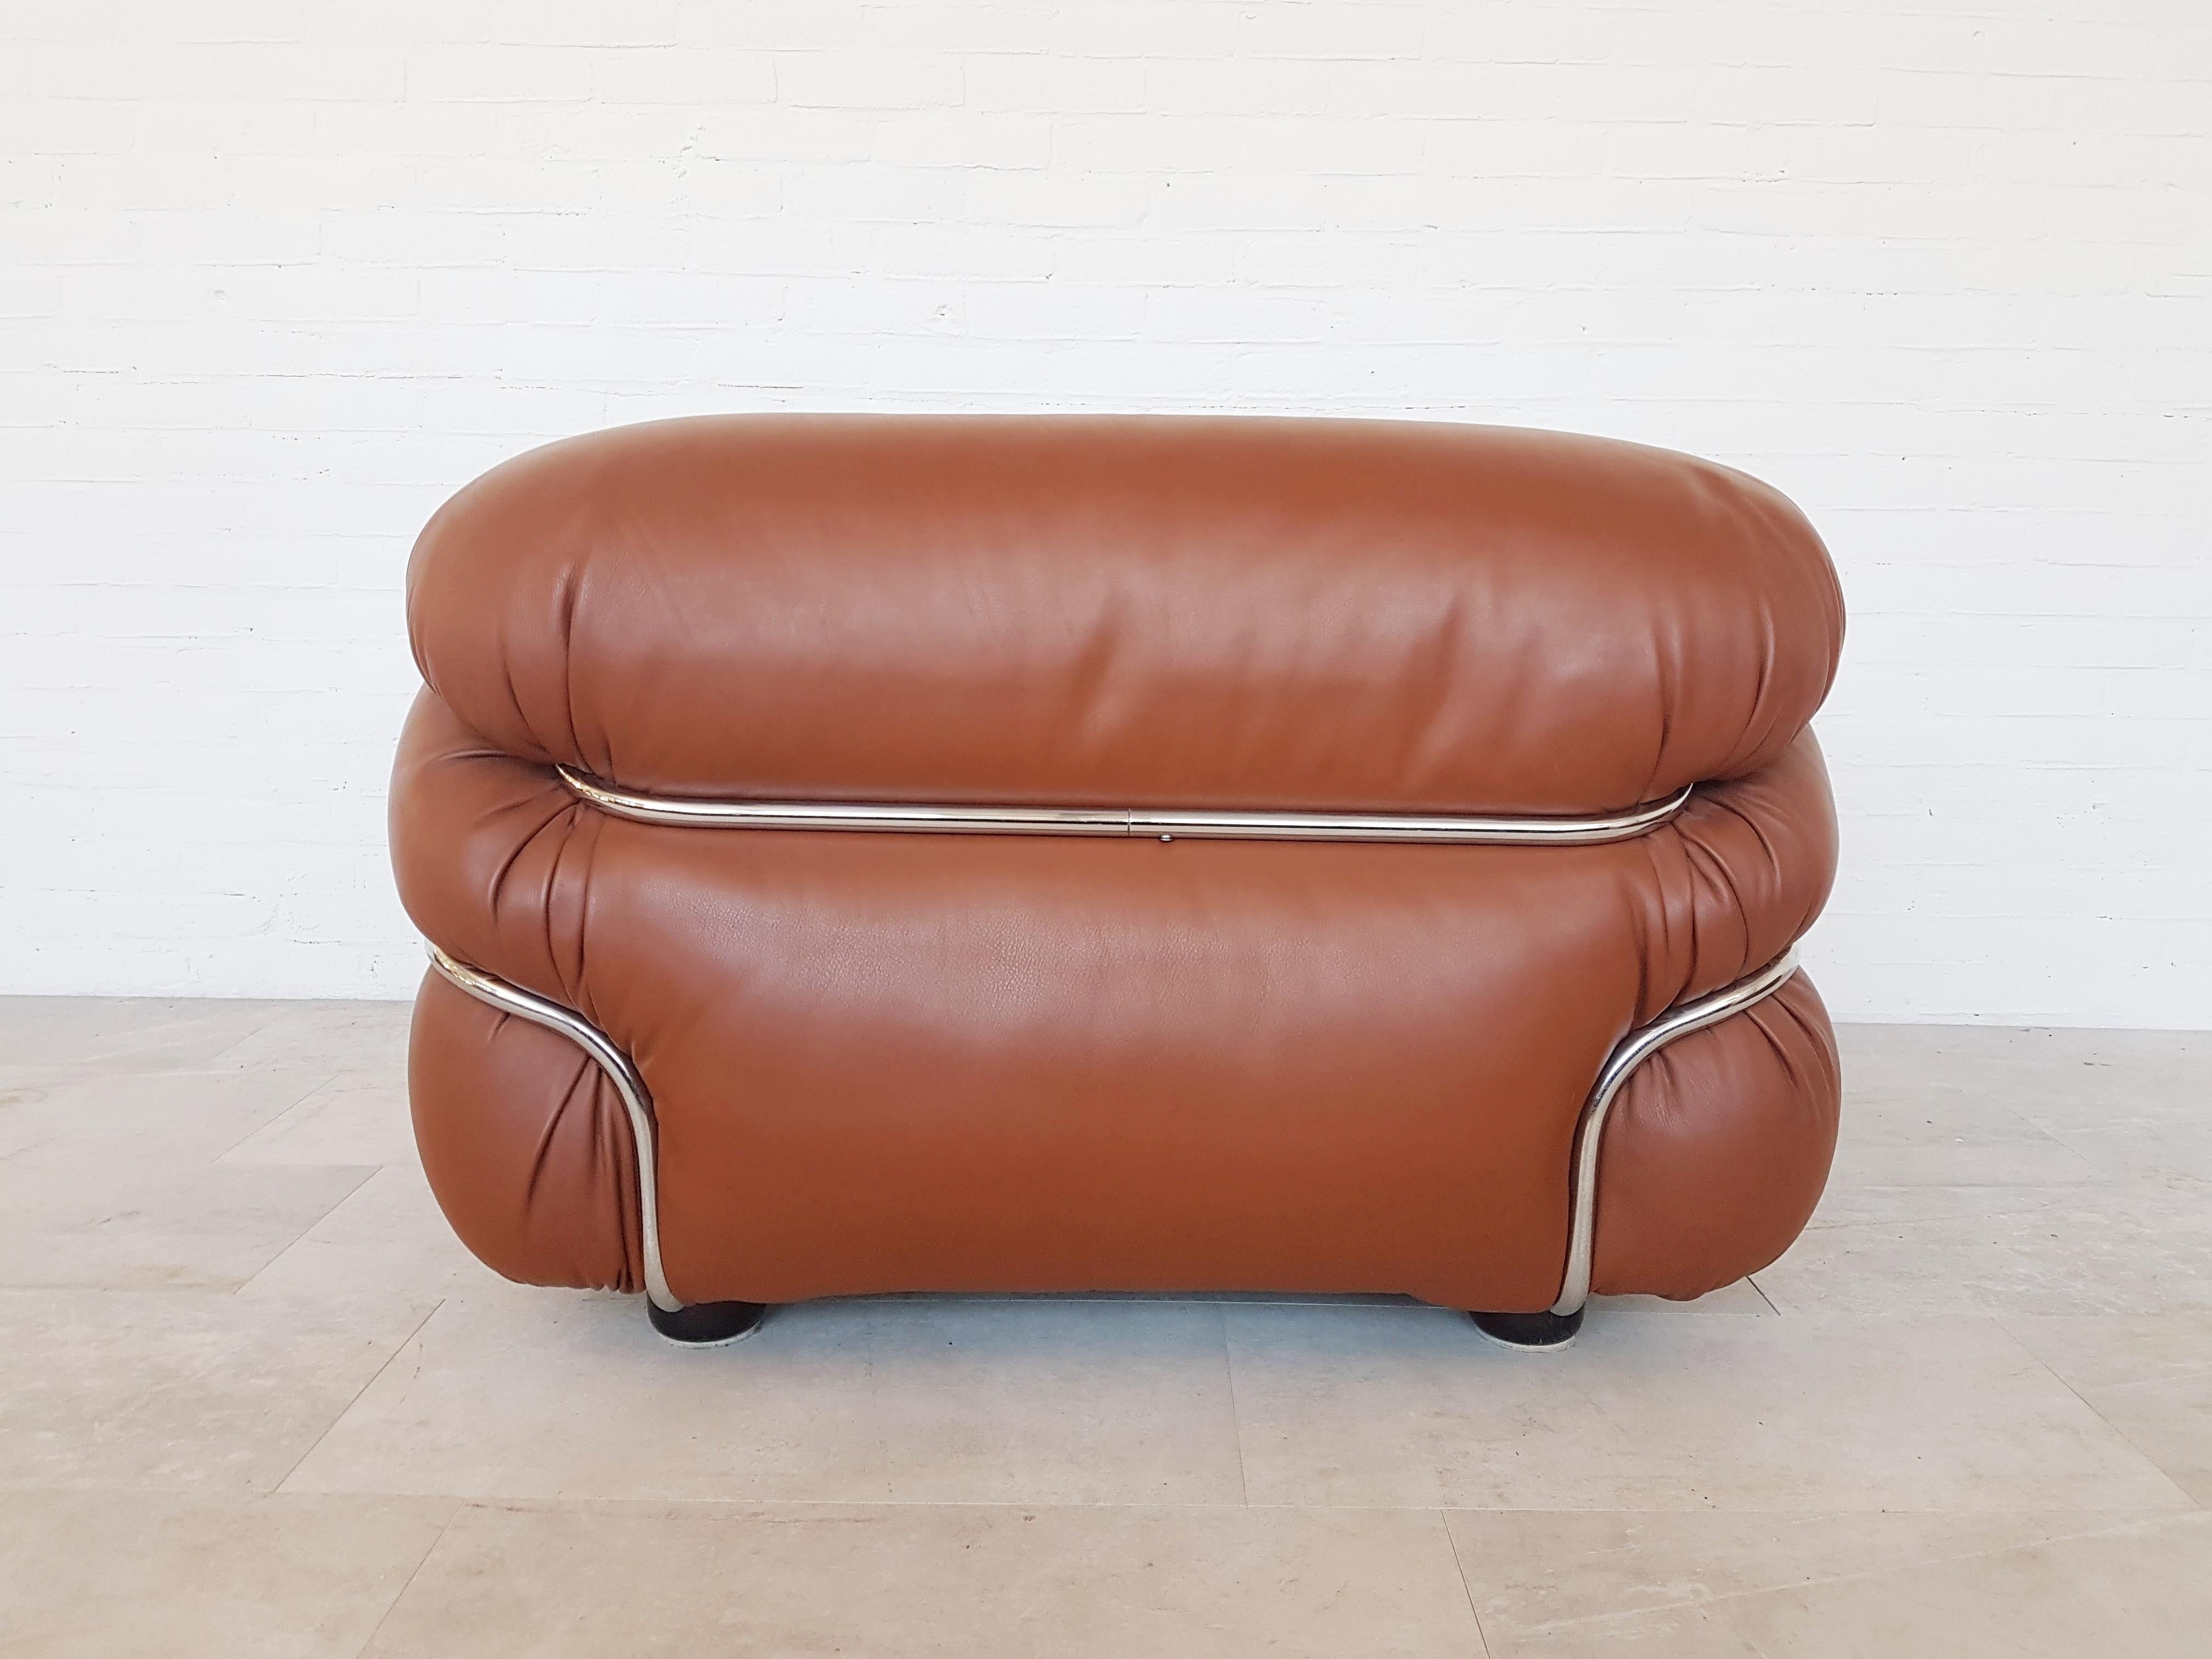 Gianfranco Frattini designed this awesome Space Age piece in the 1970s for Cassina. A club chair in cognac / whiskey colored leather and a chrome frame. Would fit well in a mad men inspired interior.




  